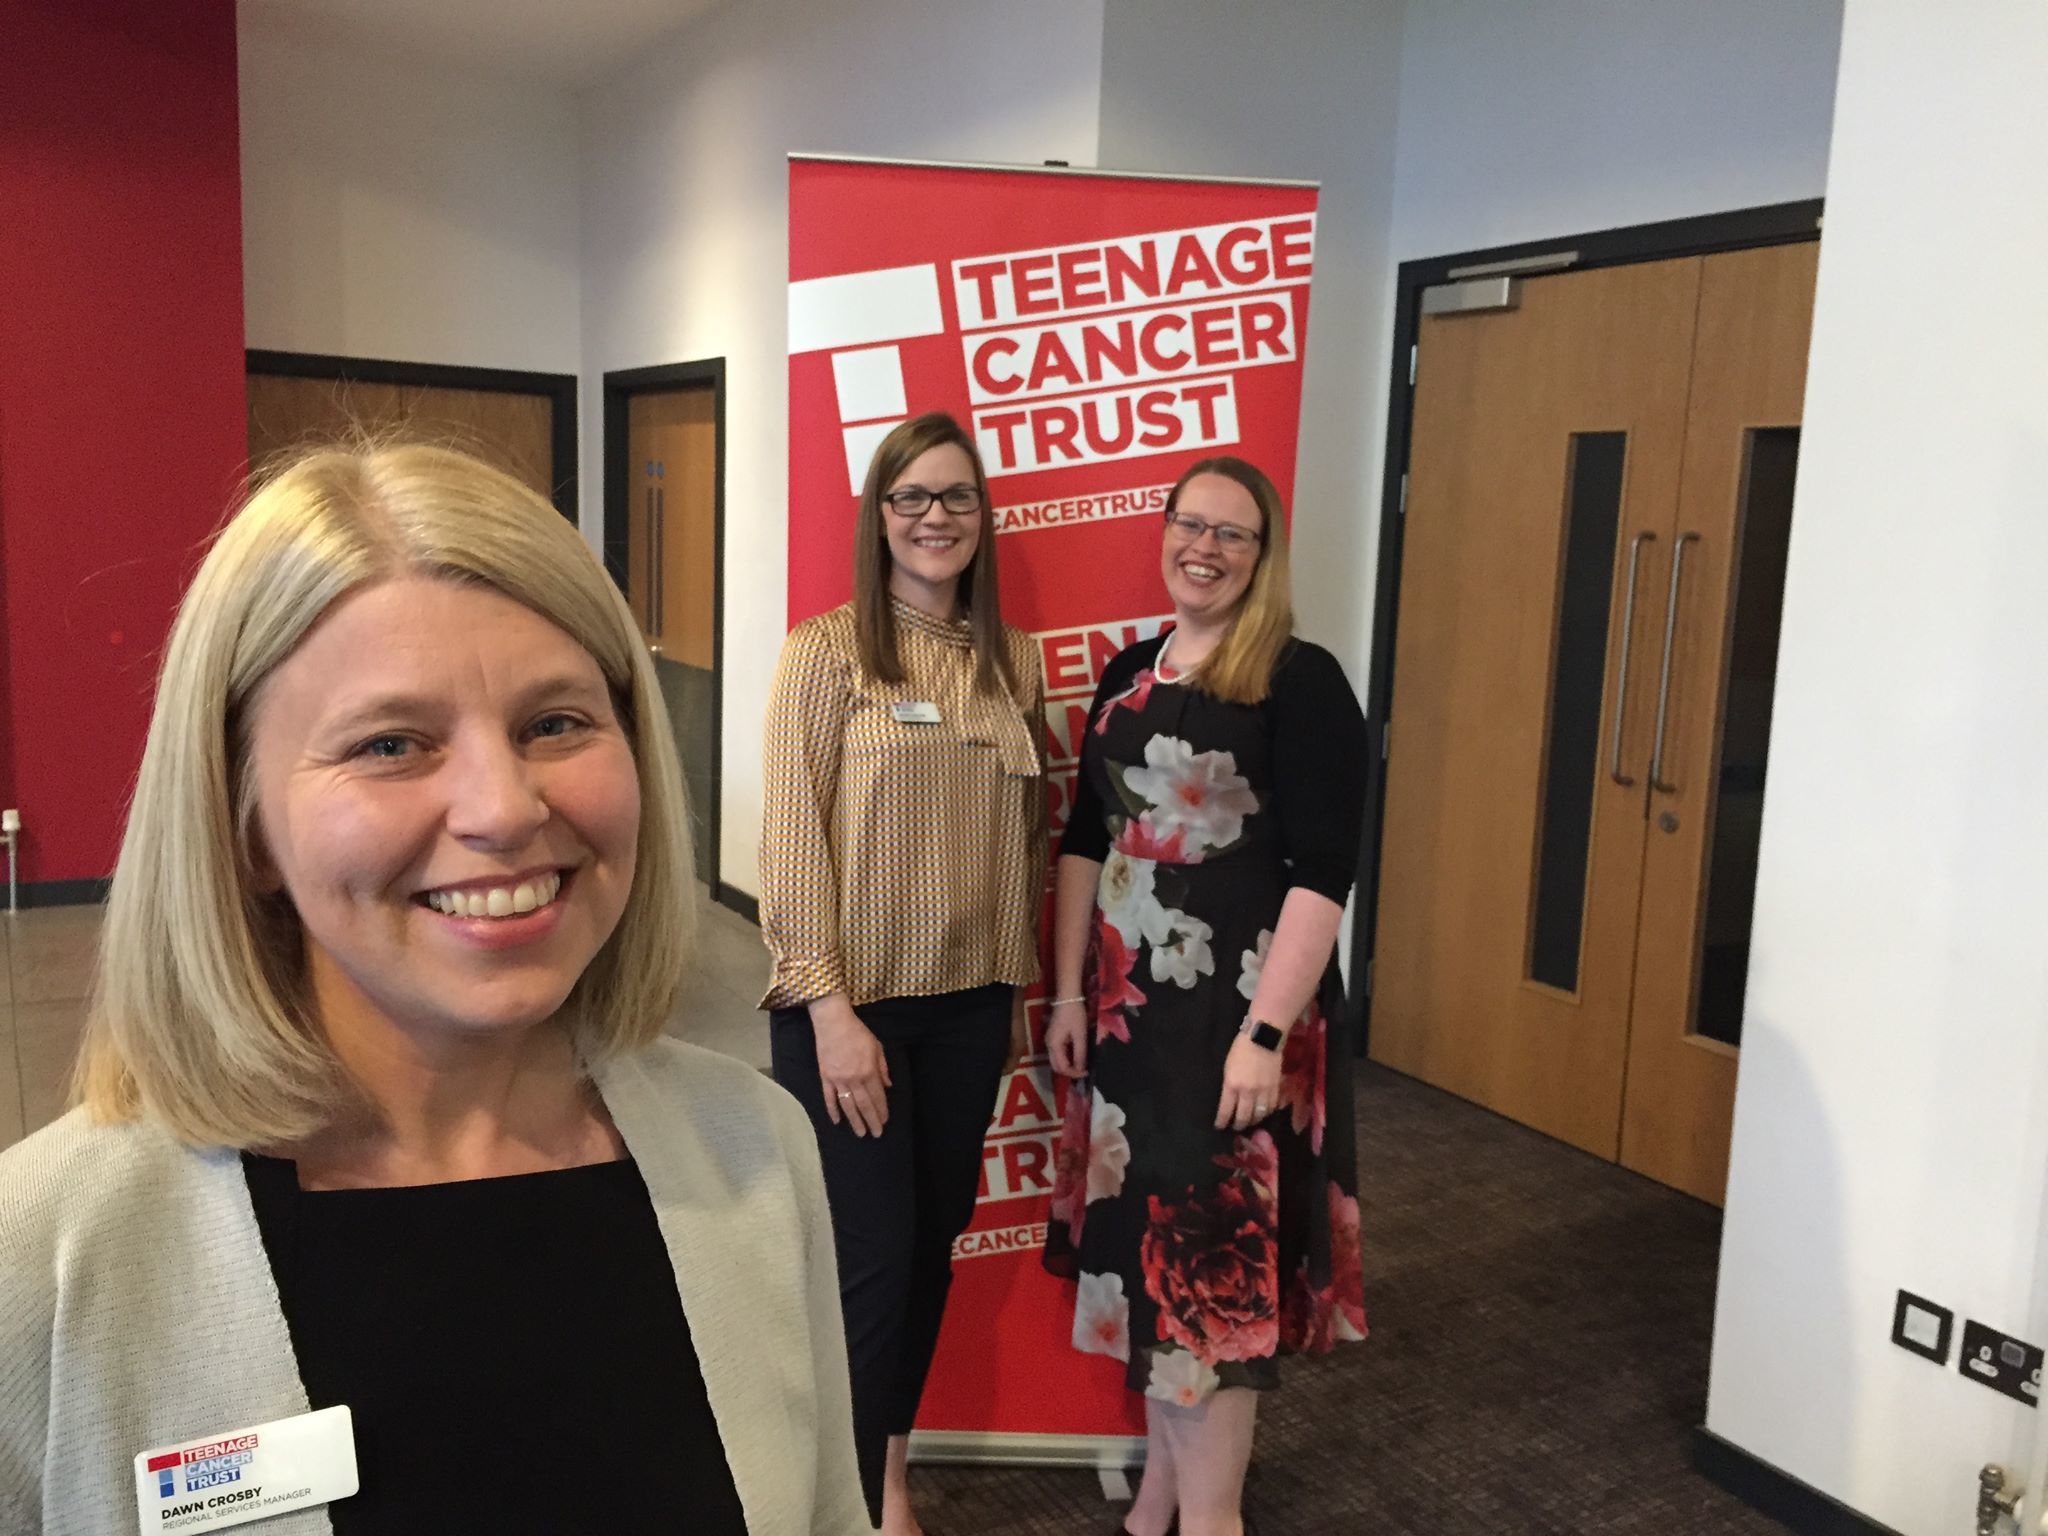 Dawn Crosby (front) pictured with Aberdeen's new Teenage Cancer Trust nursing staff Diane Brands and Amanda Copland